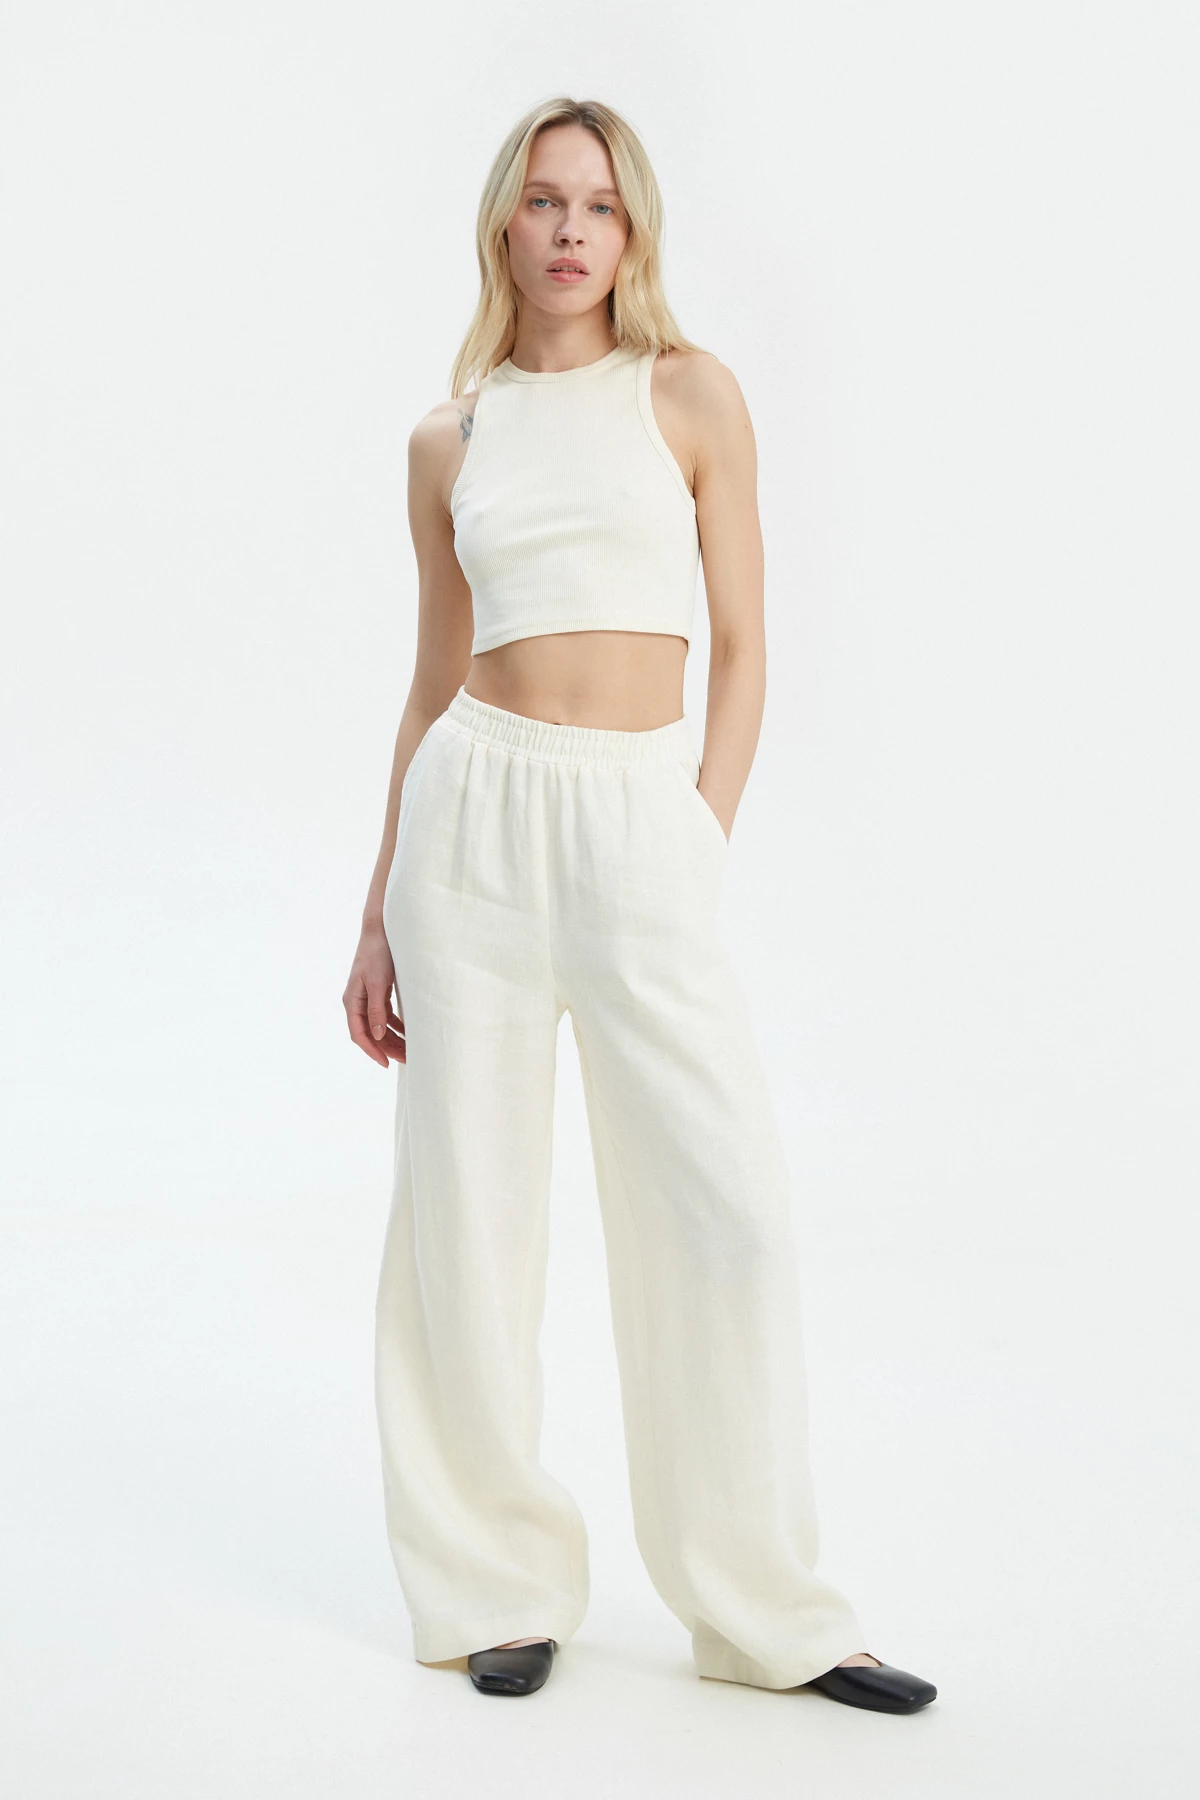 Milky loose-fit pants made of 100% linen, photo 1